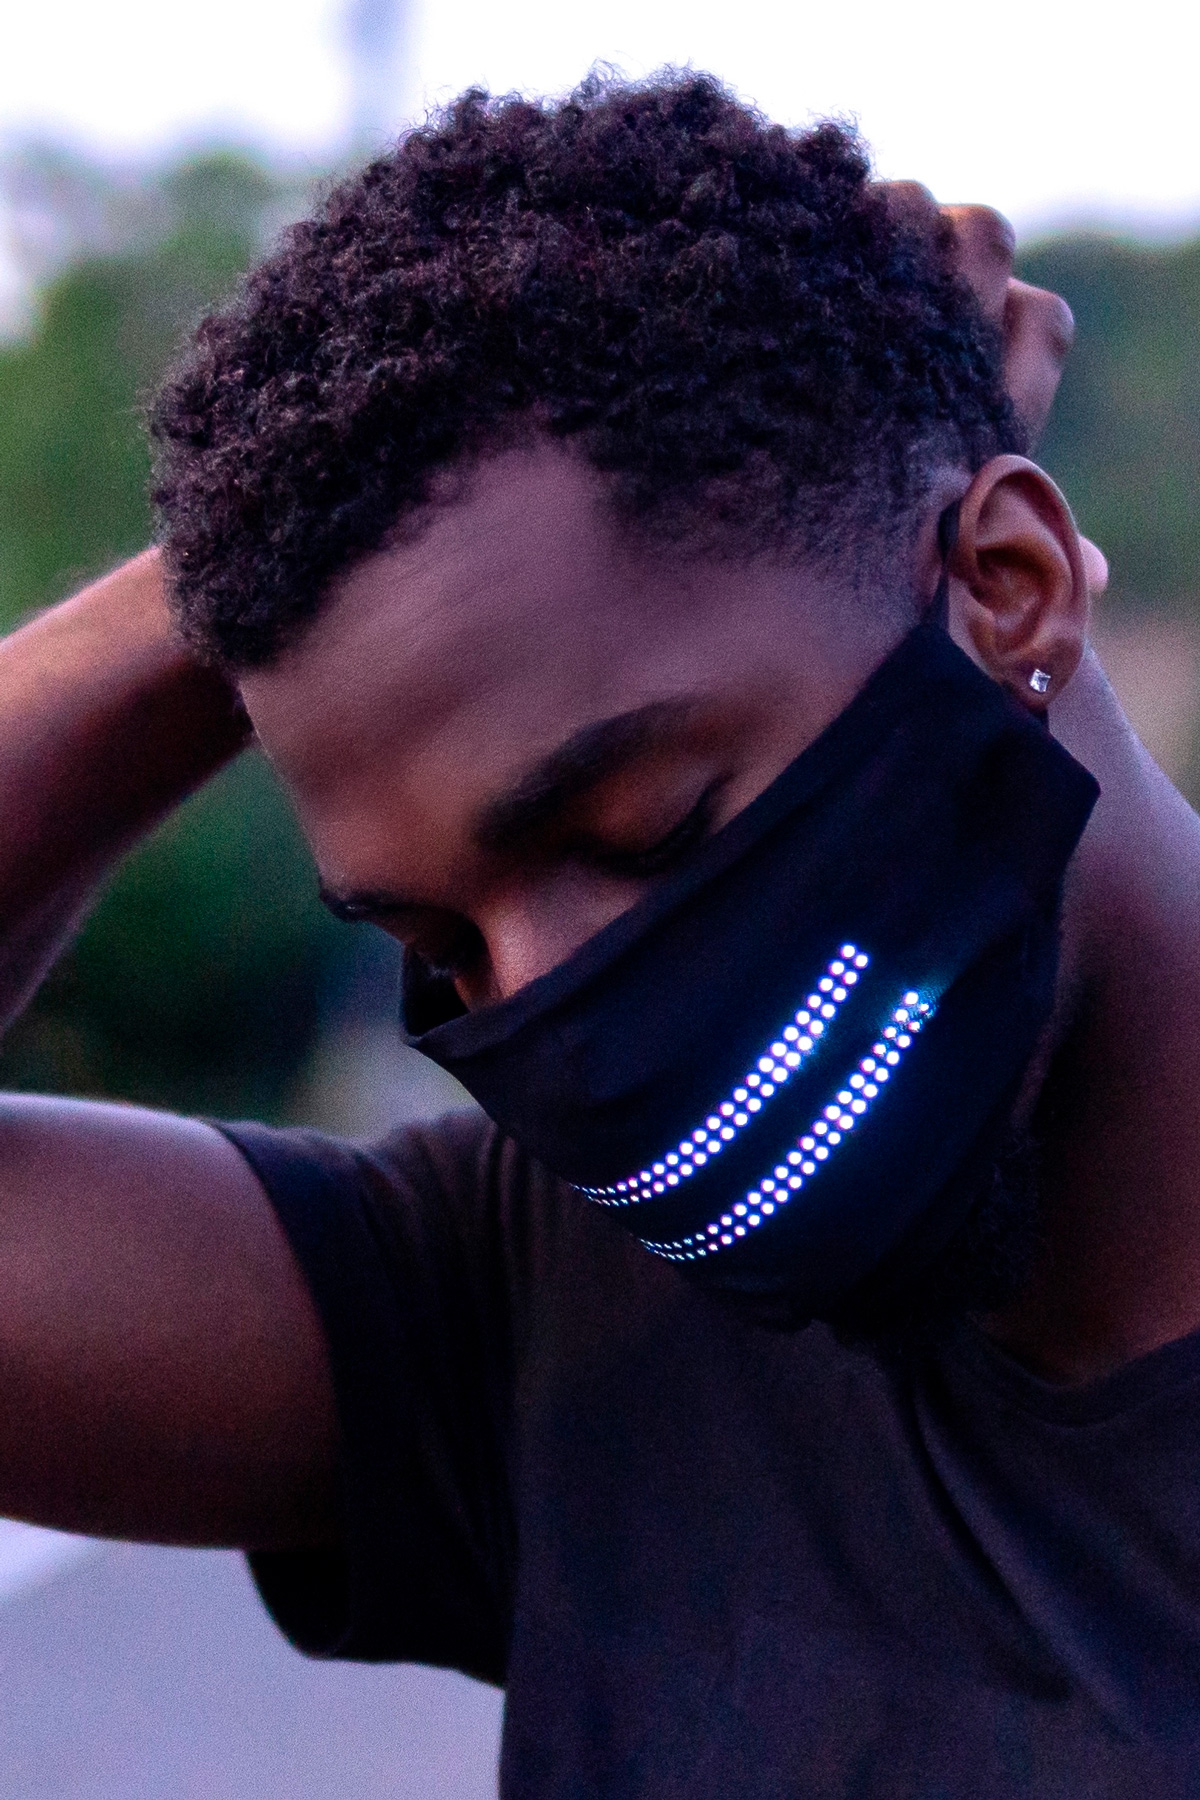 led voice activated face mask